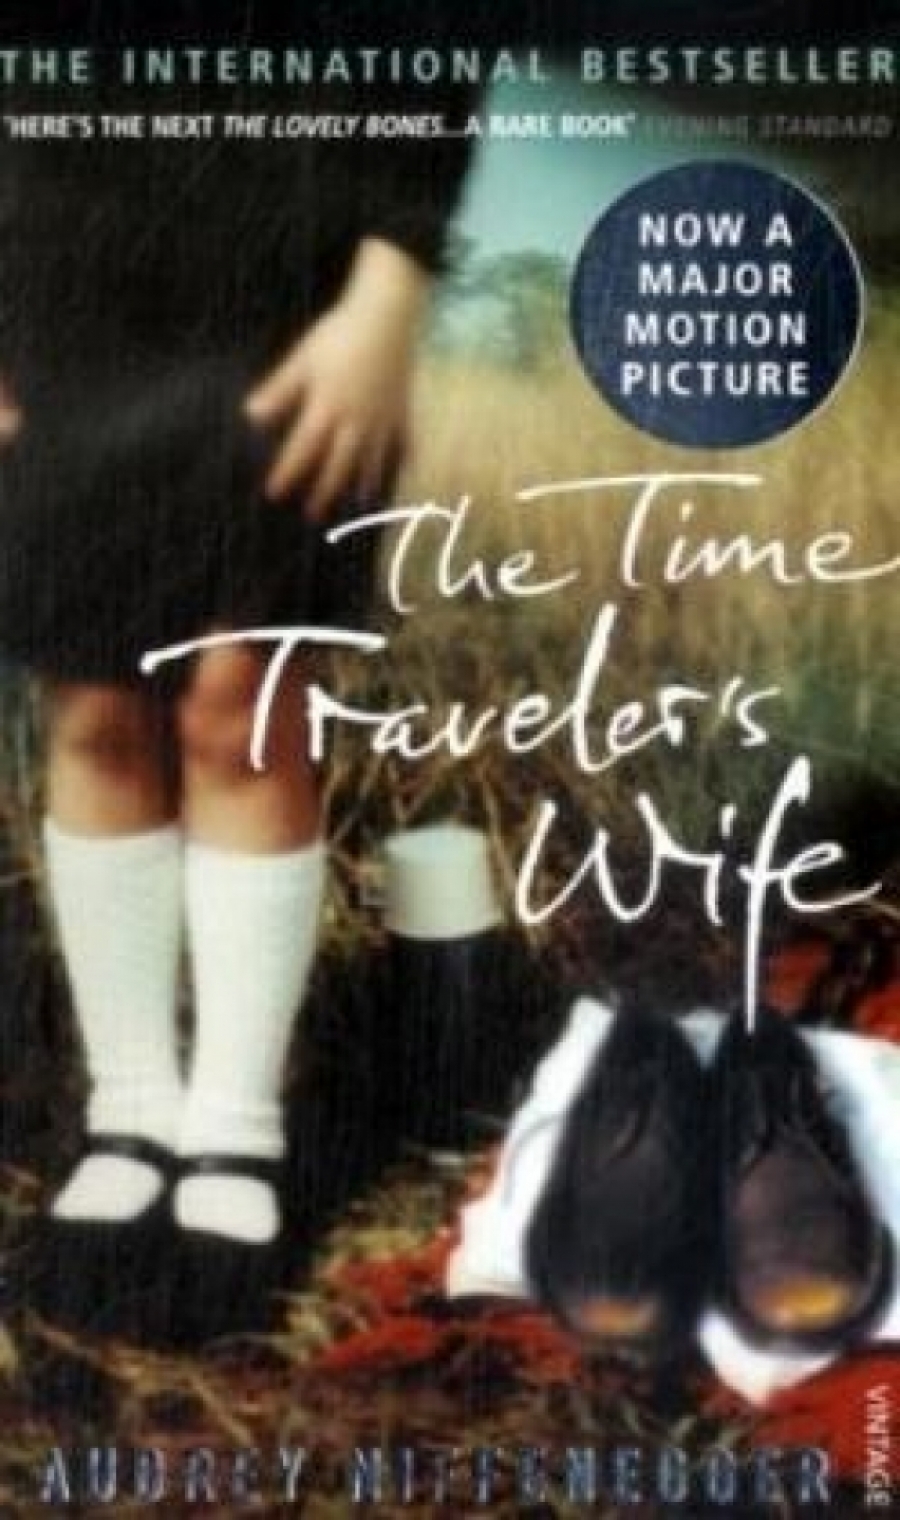 Niffenegger, Audrey The Time Travelers's Wife 